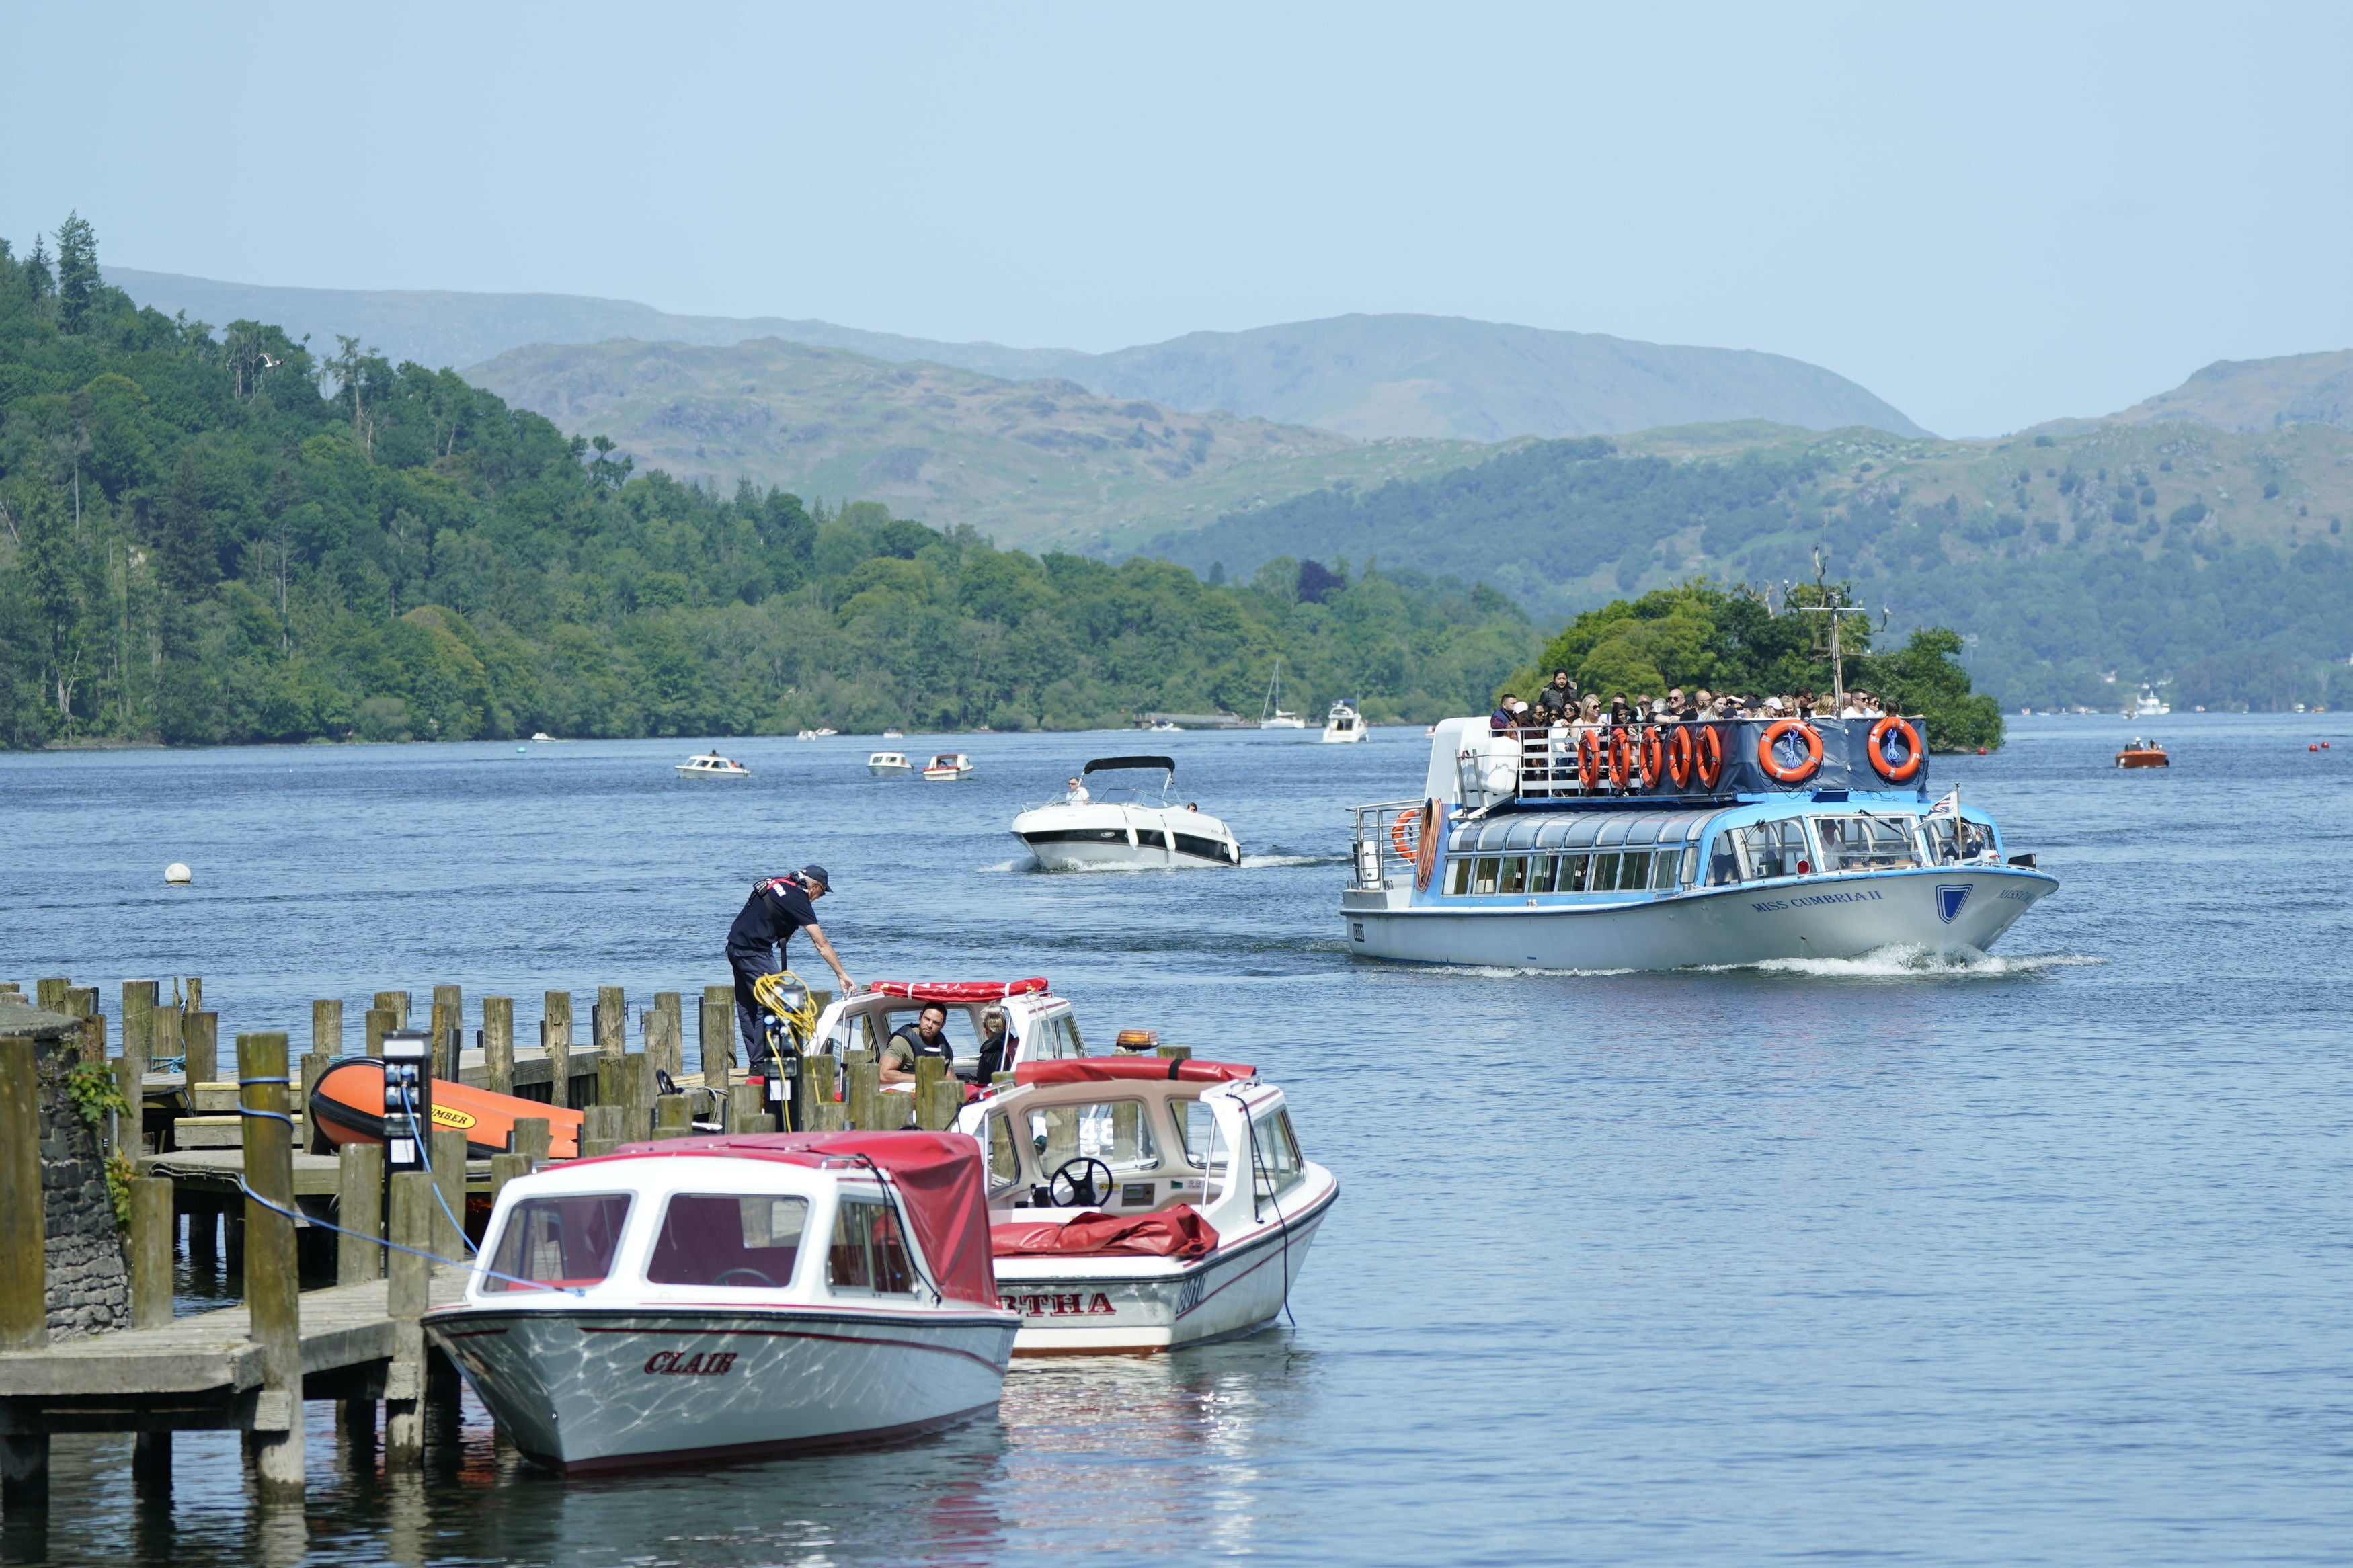 Windermere is one of the UK’s most popular natural tourist attractions